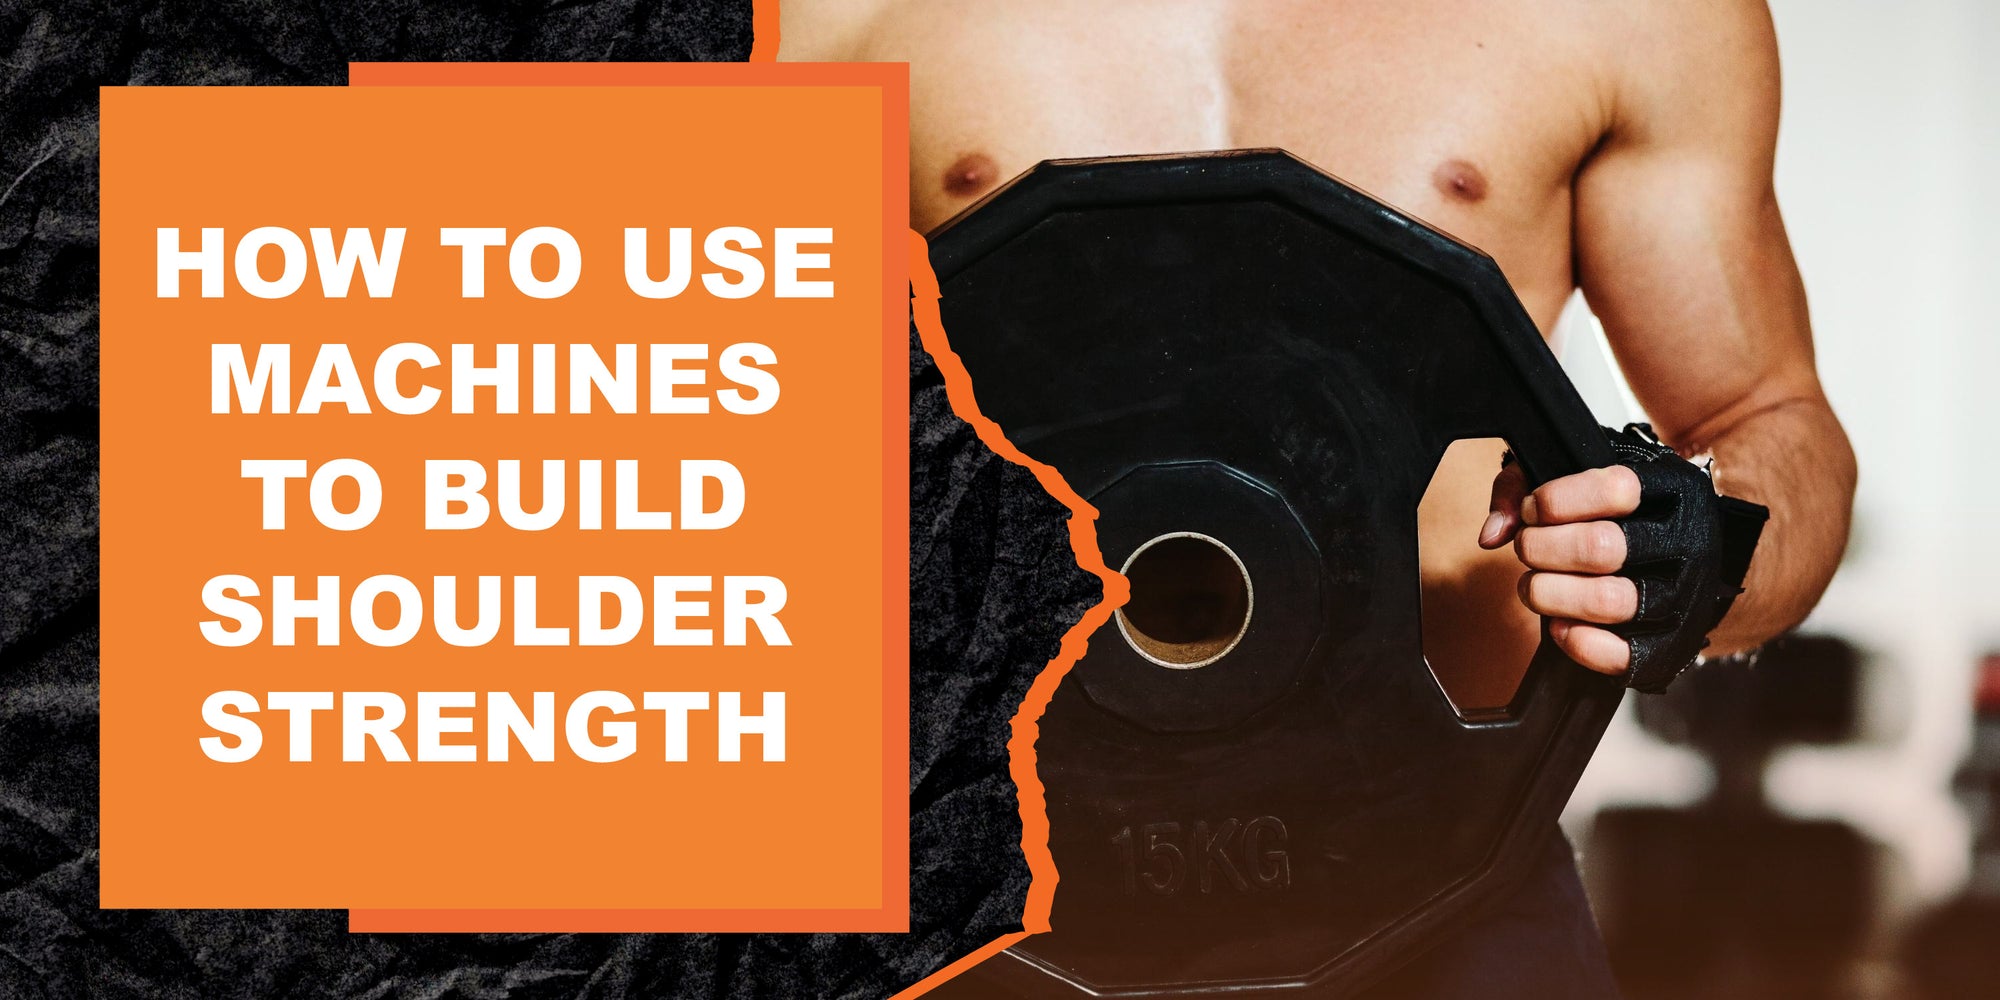 How to Use Machines to Build Shoulder Strength